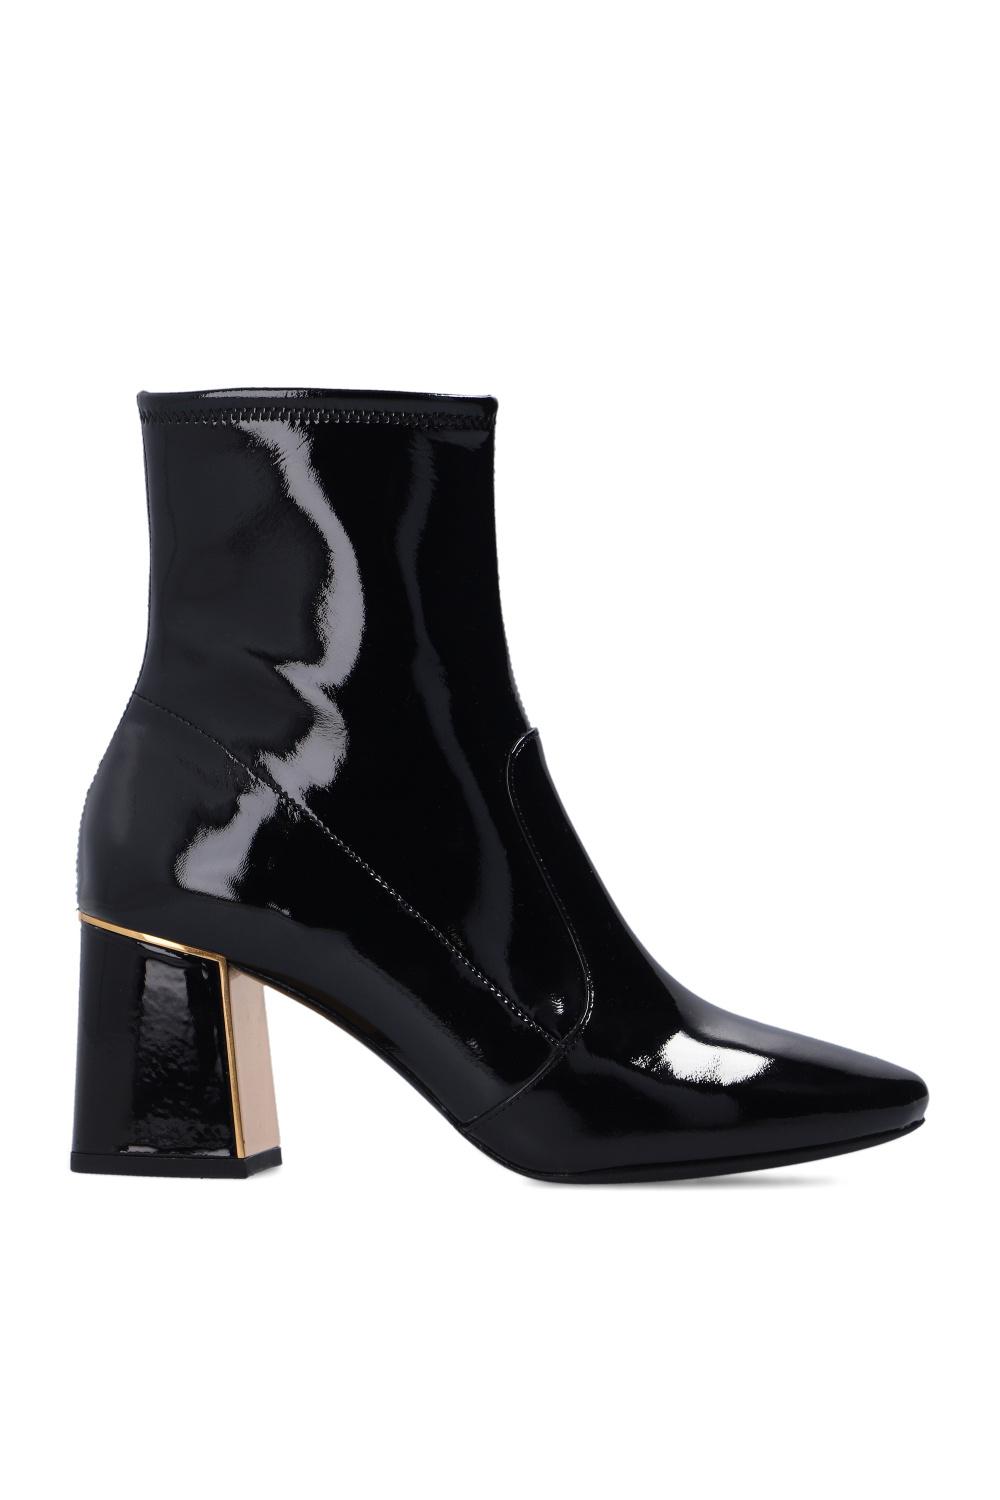 Tory Burch Gigi 70mm Ankle Boots in Black | Lyst